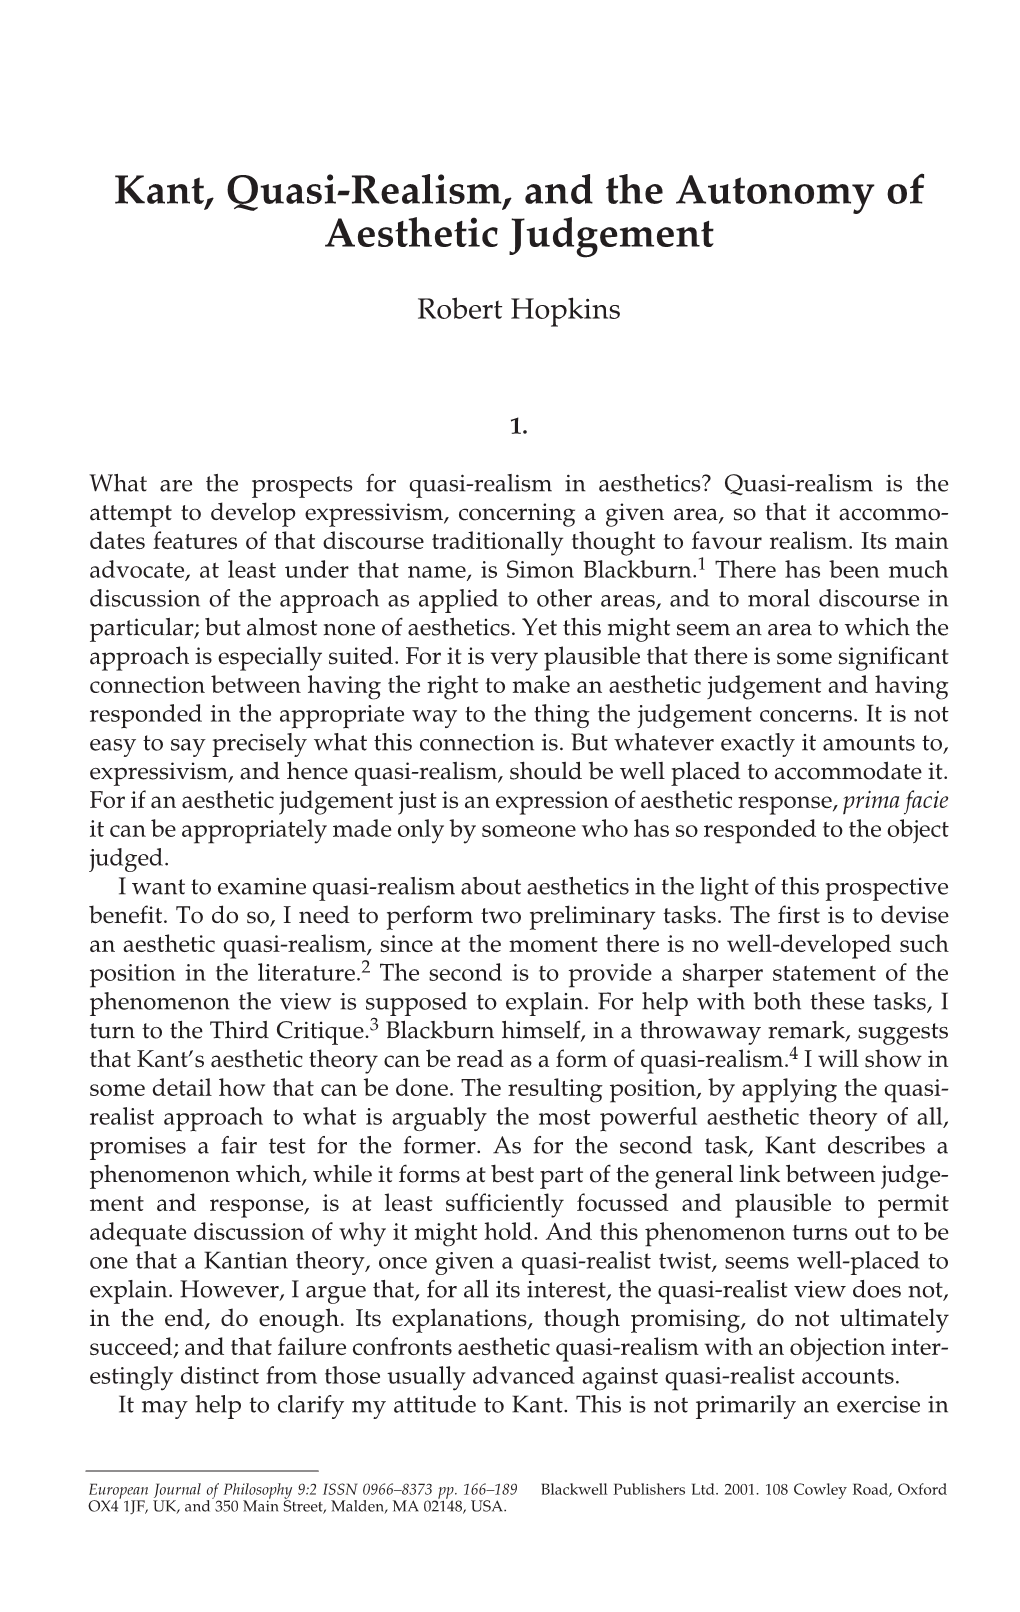 Kant, Quasi-Realism, and the Autonomy of Aesthetic Judgment